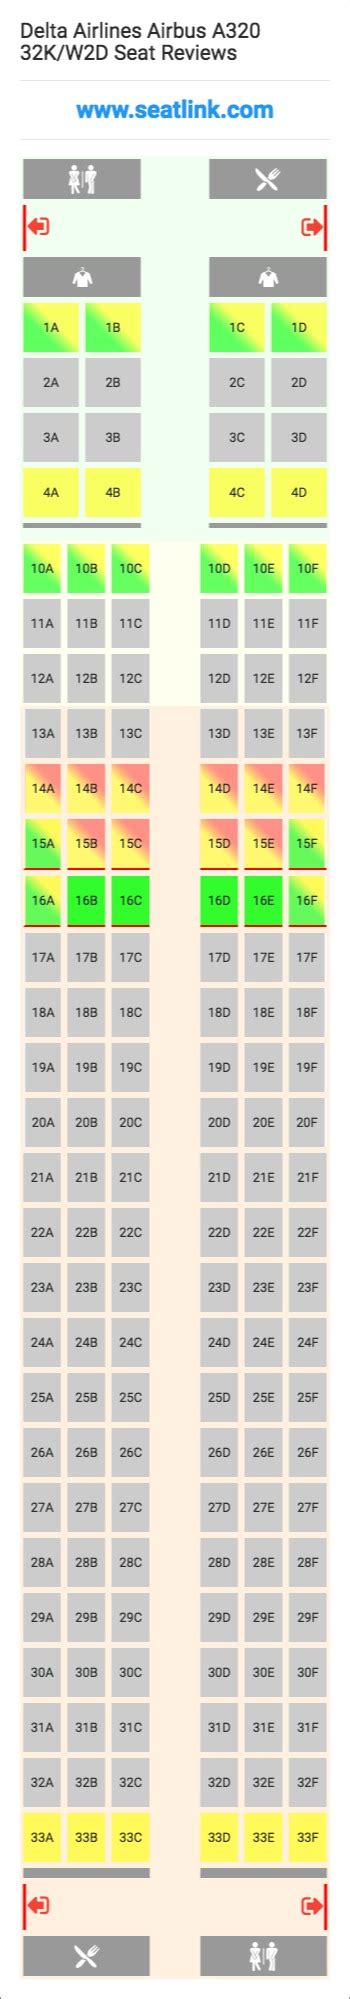 Delta Airbus A Neo Seat Map Image To U